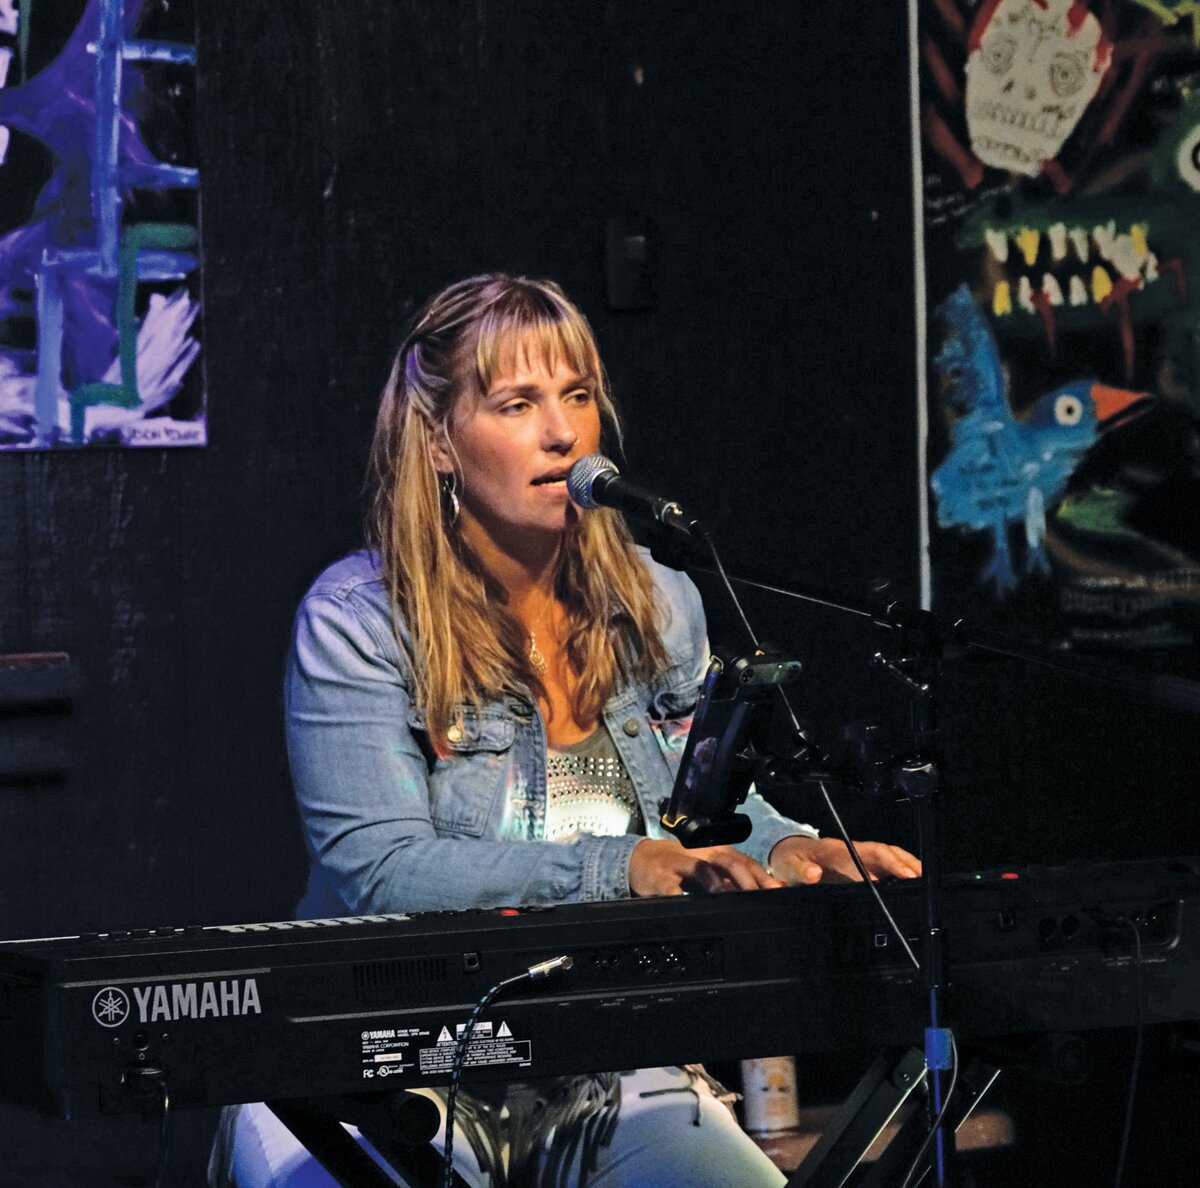 A classically trained pianist, Rachel Hill shows her songwriting chops at a showcase in Point Pleasant.